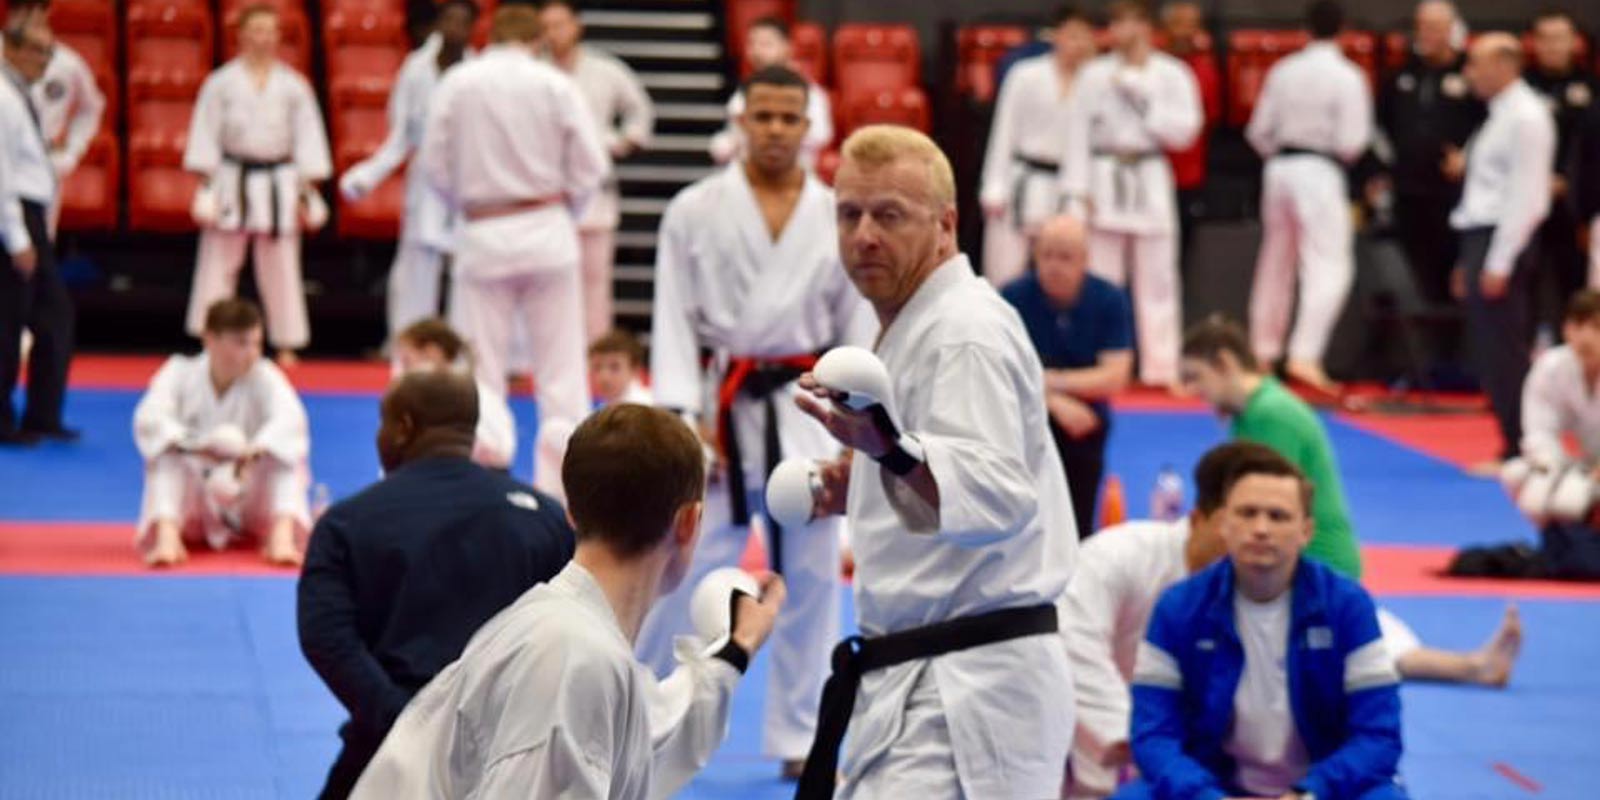 Ian Connell Sensei faces his opponent during competition